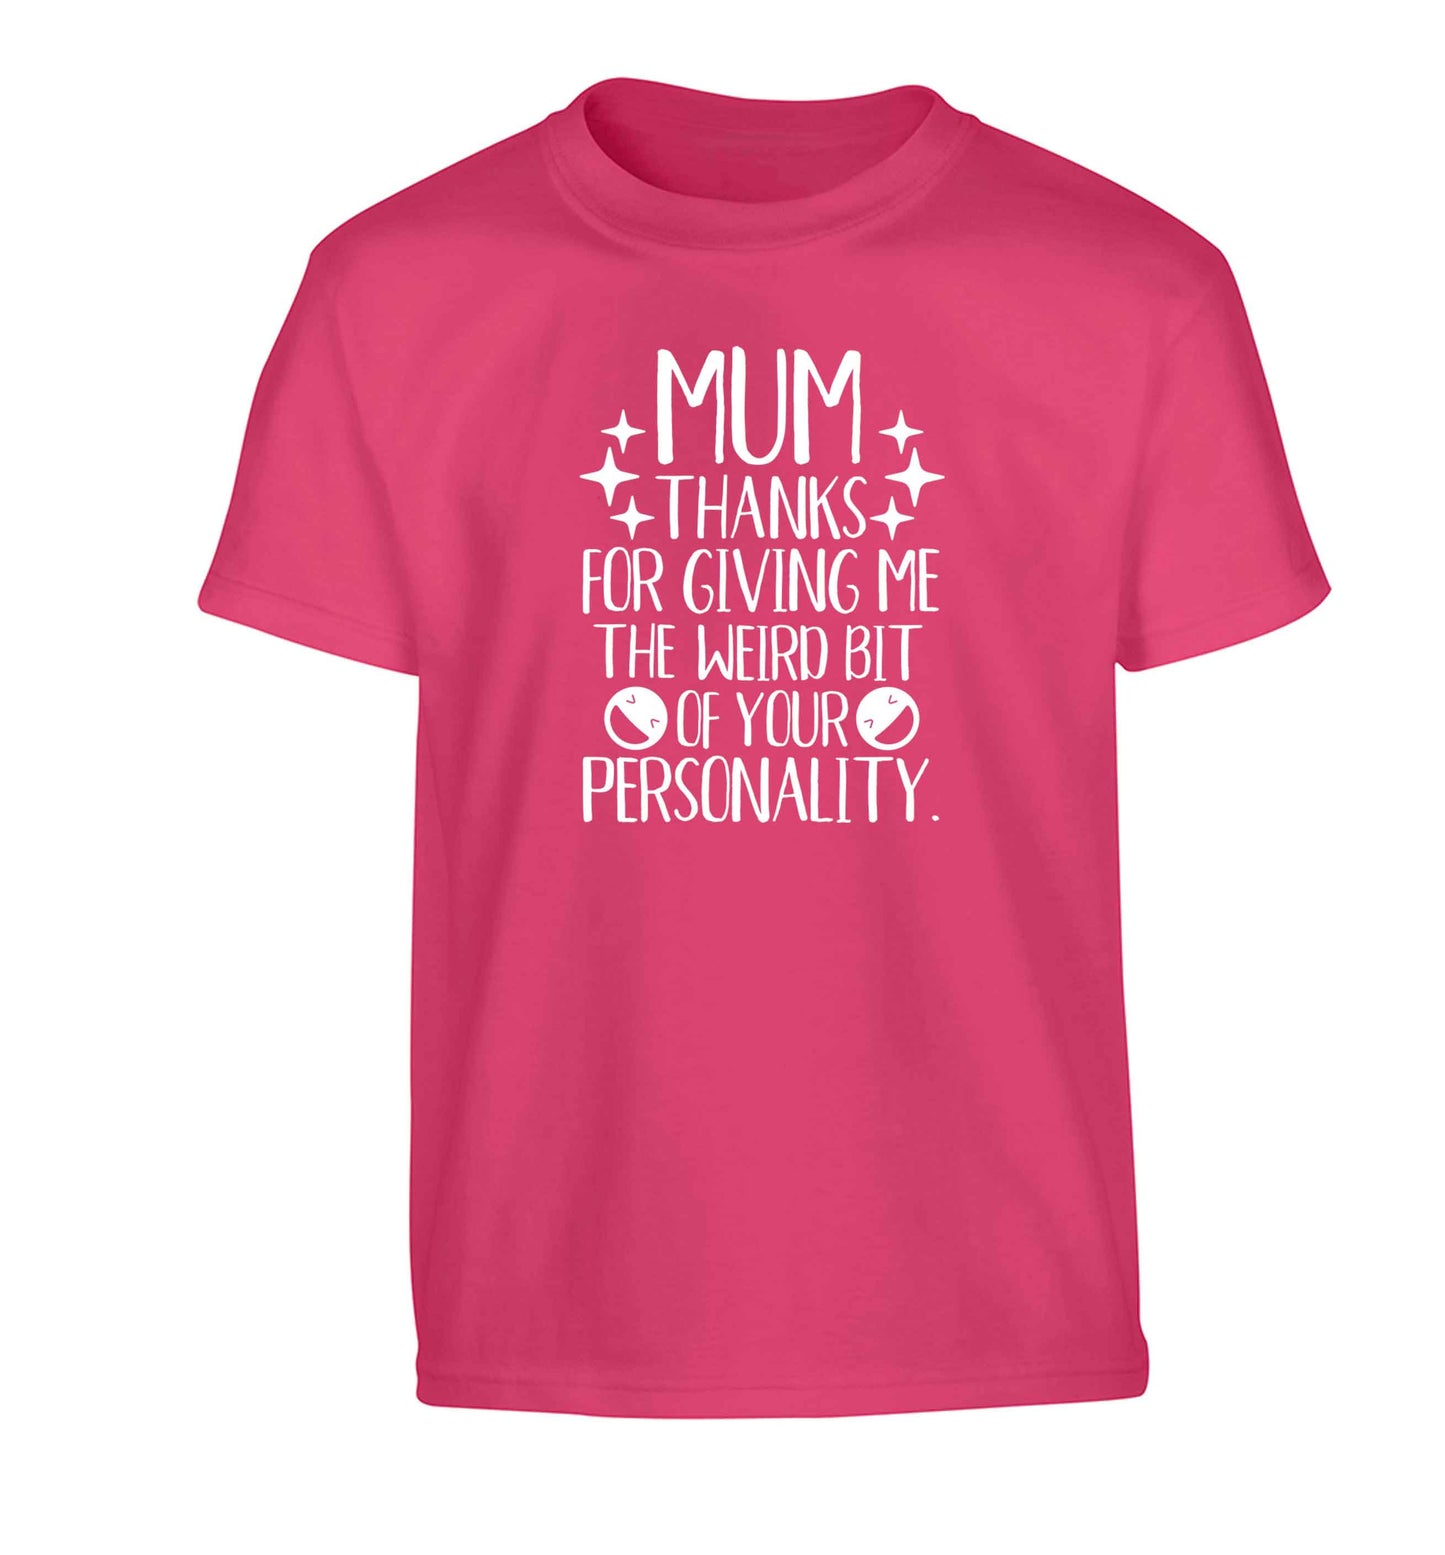 Mum thanks for giving me the weird bit of your personality Children's pink Tshirt 12-13 Years